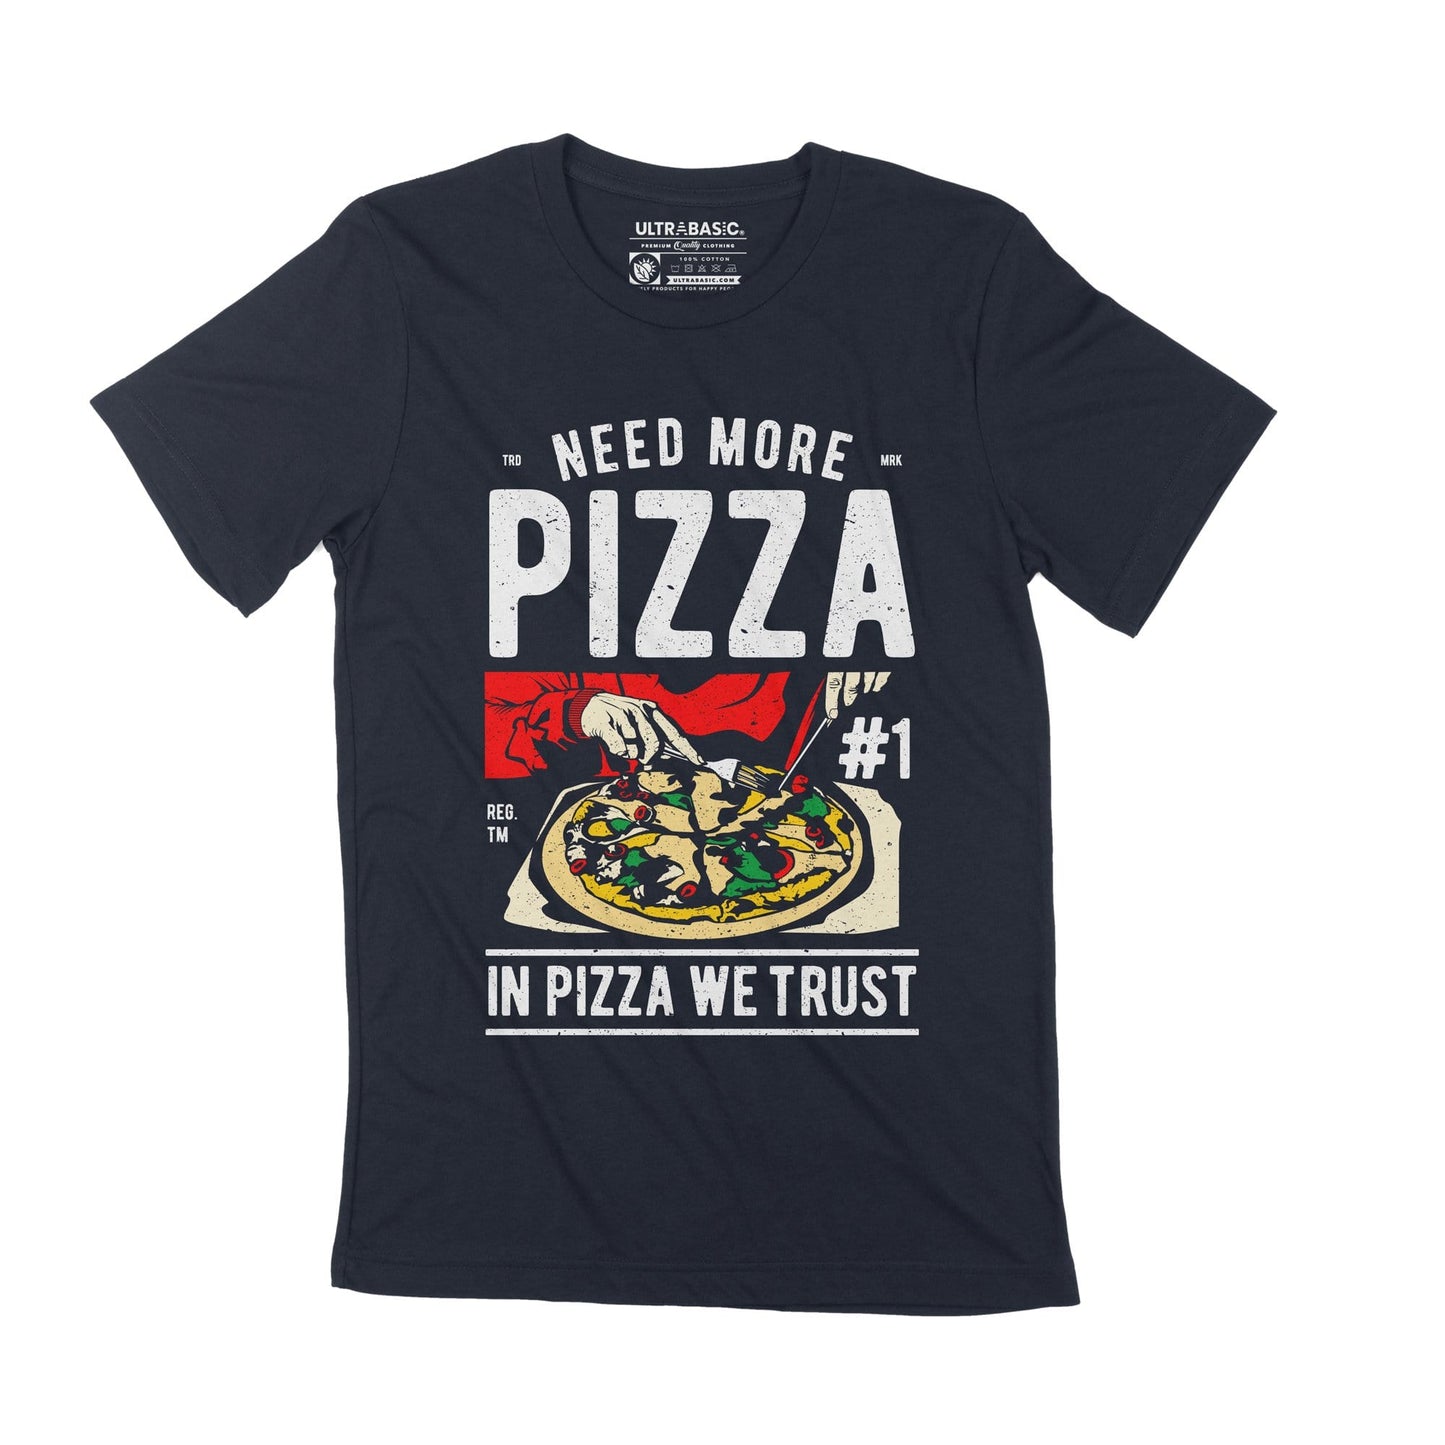 ULTRABASIC Need More Pizza Men's T-Shirt - In Pizza We Trust Graphic Quote Tee merch present fathers day tshirts dad apparel mercahndise letter clothing womens christmas novelty unisex classic guys adult teens casual outfits print food order eat teenager youth humor outdoor cheese sarcastic love triangle clothes 